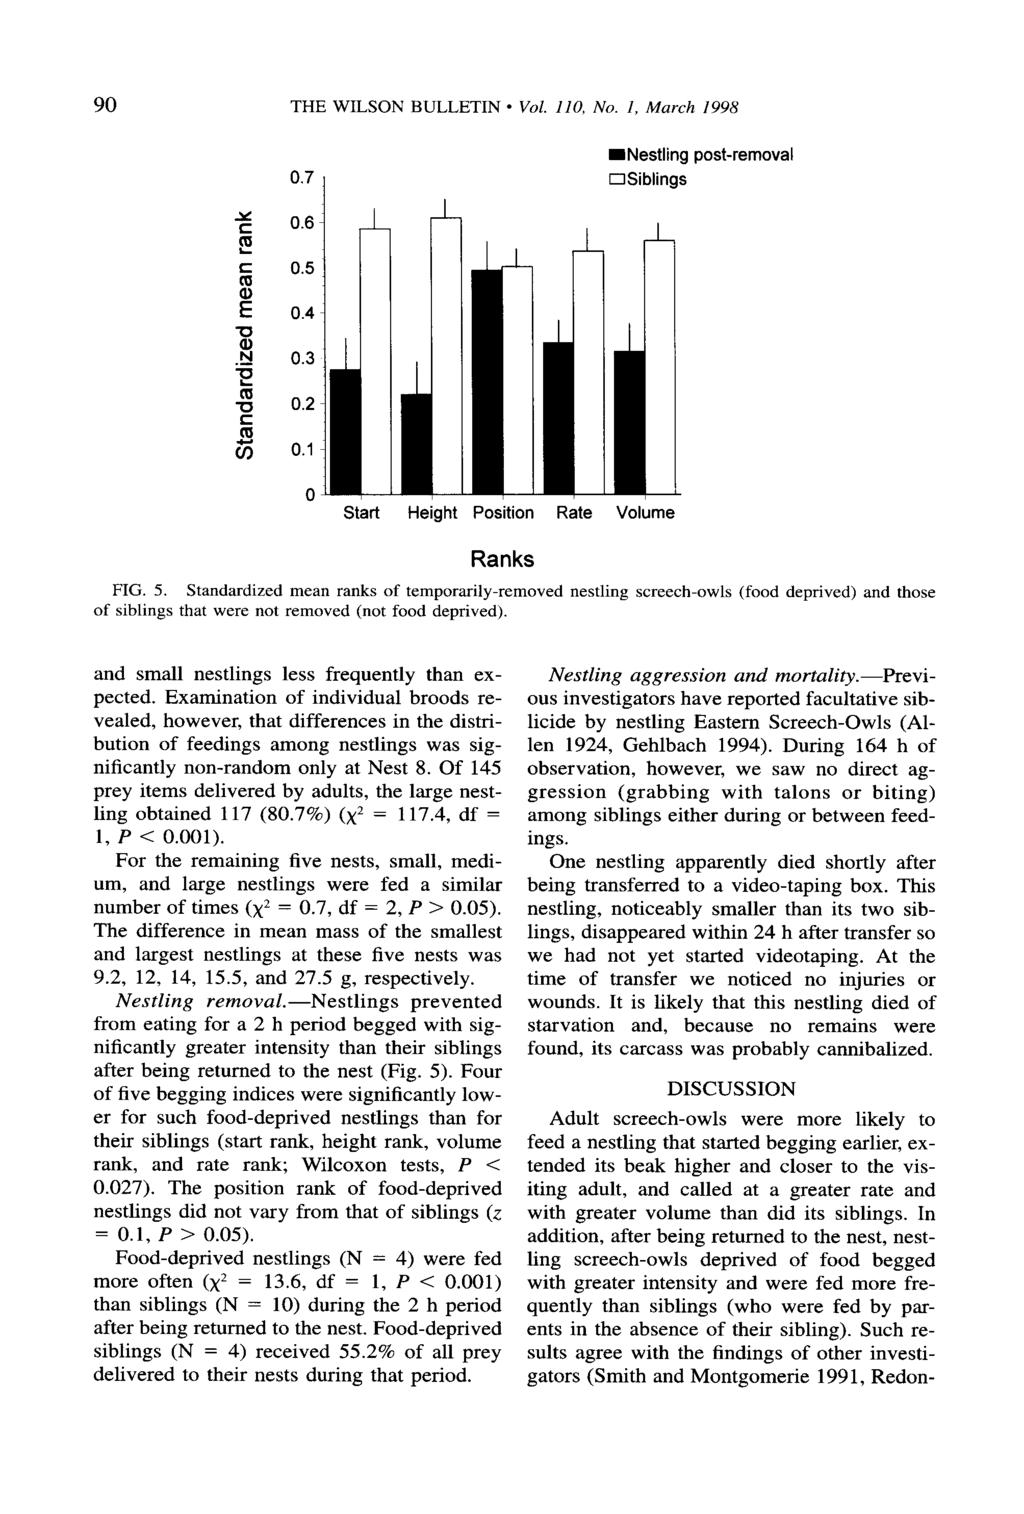 90 THE WILSON BULLETIN l Vol. 110, No. I, March 1998 0.7 0.6 0.5 0.4 0.3 0.2 0.1 0 Start Heigh t I Position Rate -Nestling OSiblings Volume post-removal FIG. 5.